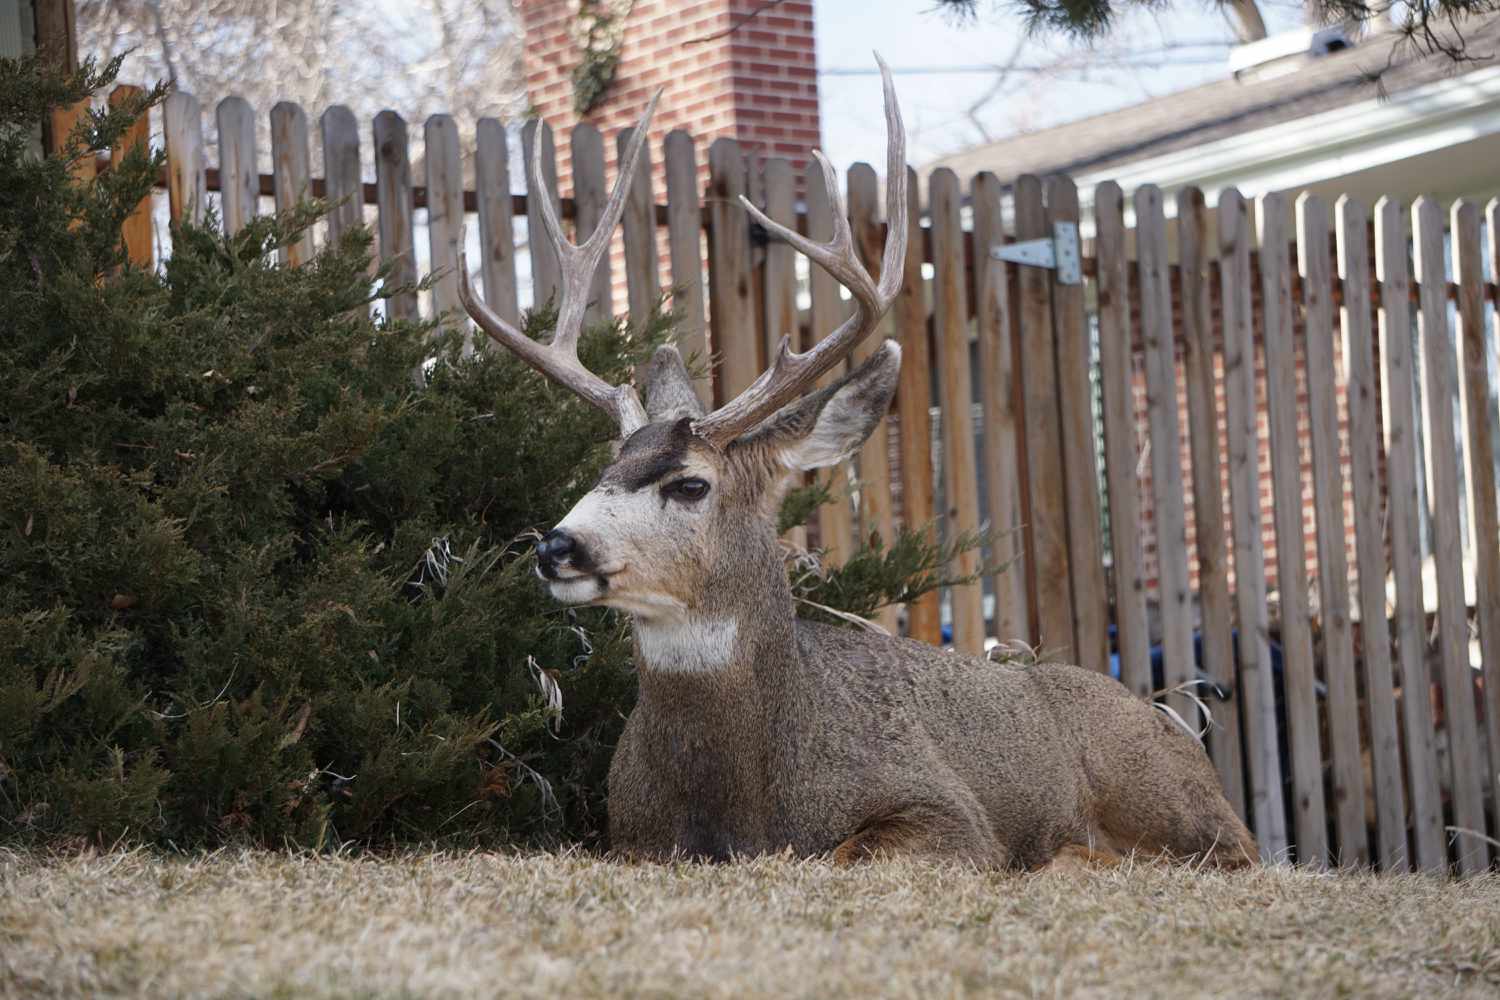 Deer laying down by a wooden privacy fence